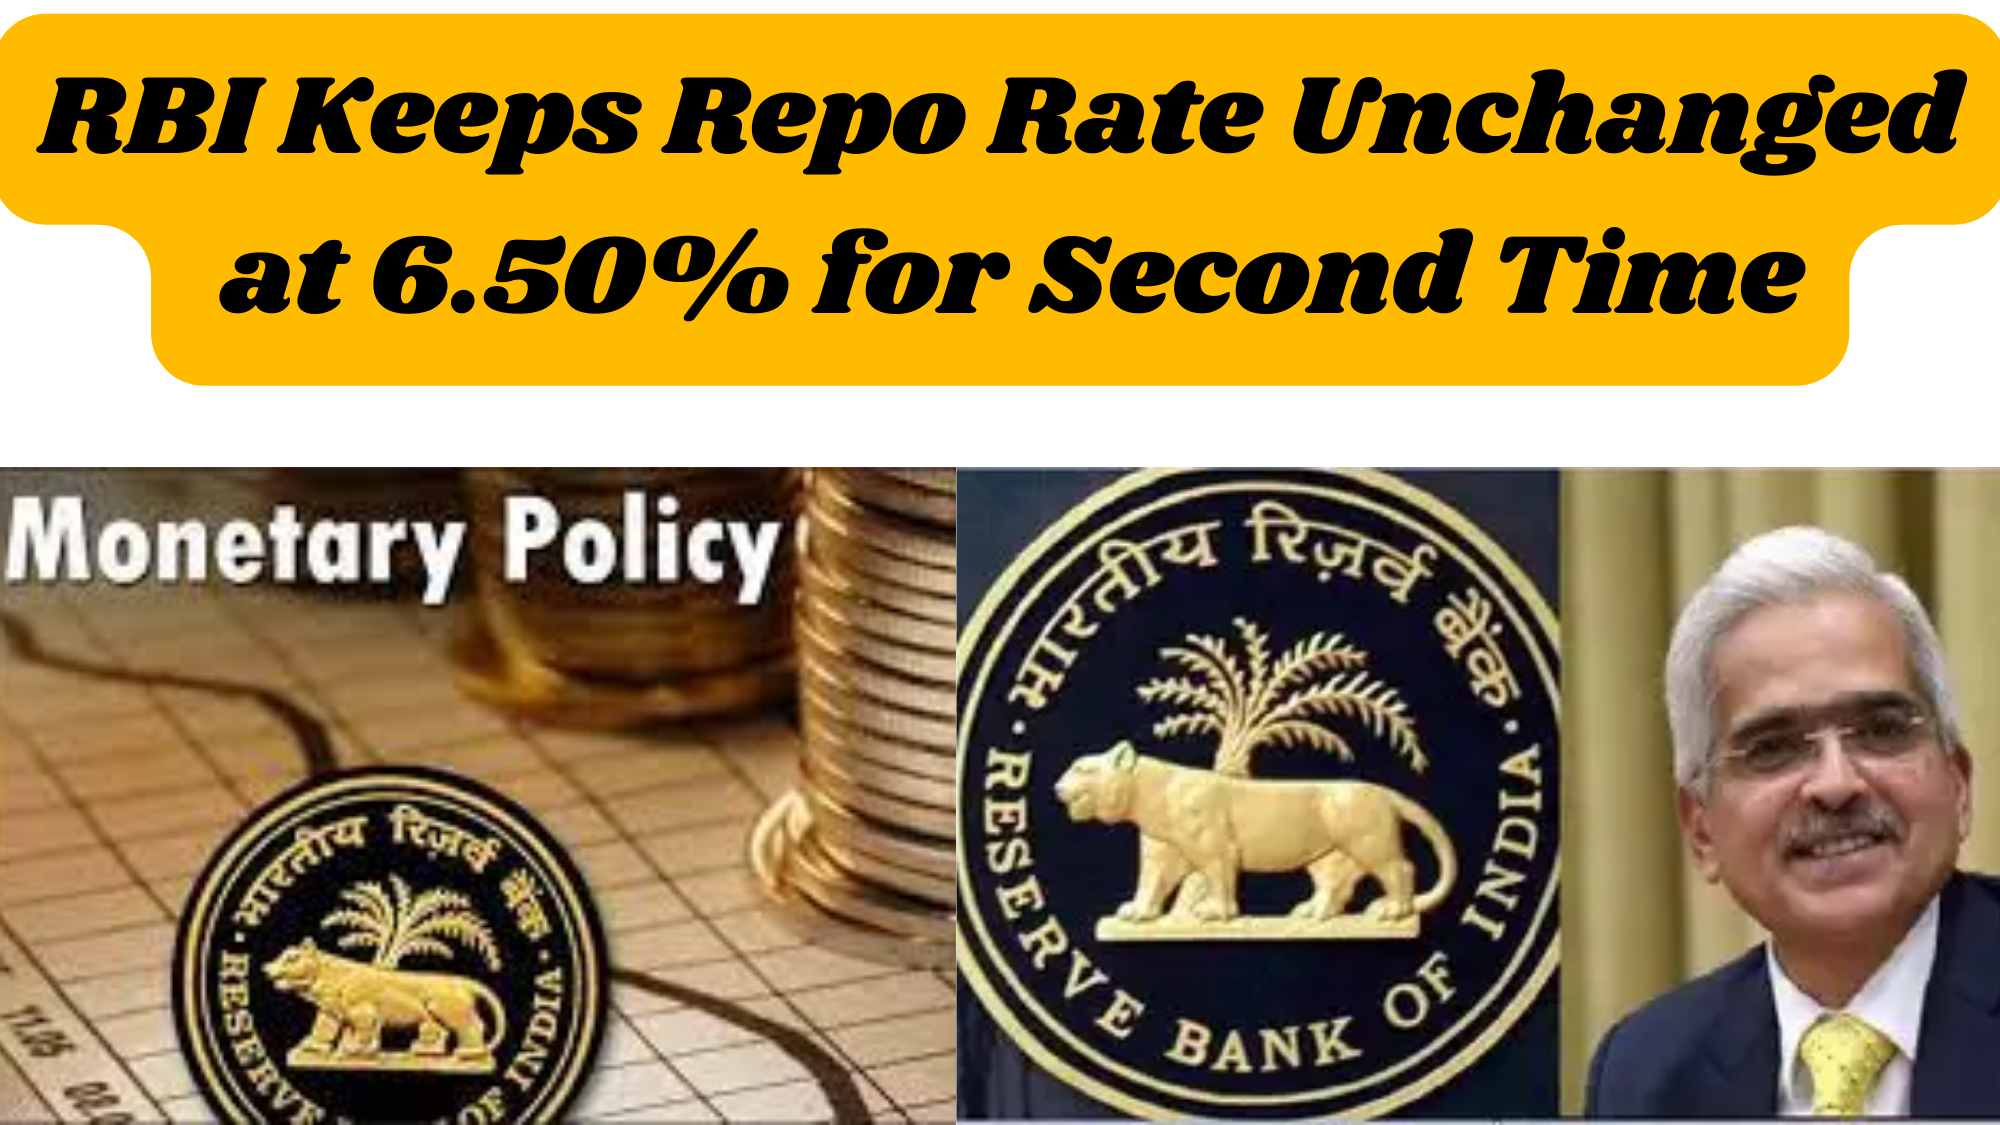 RBI Keeps Repo Rate Unchanged at 6.50% for Second Time